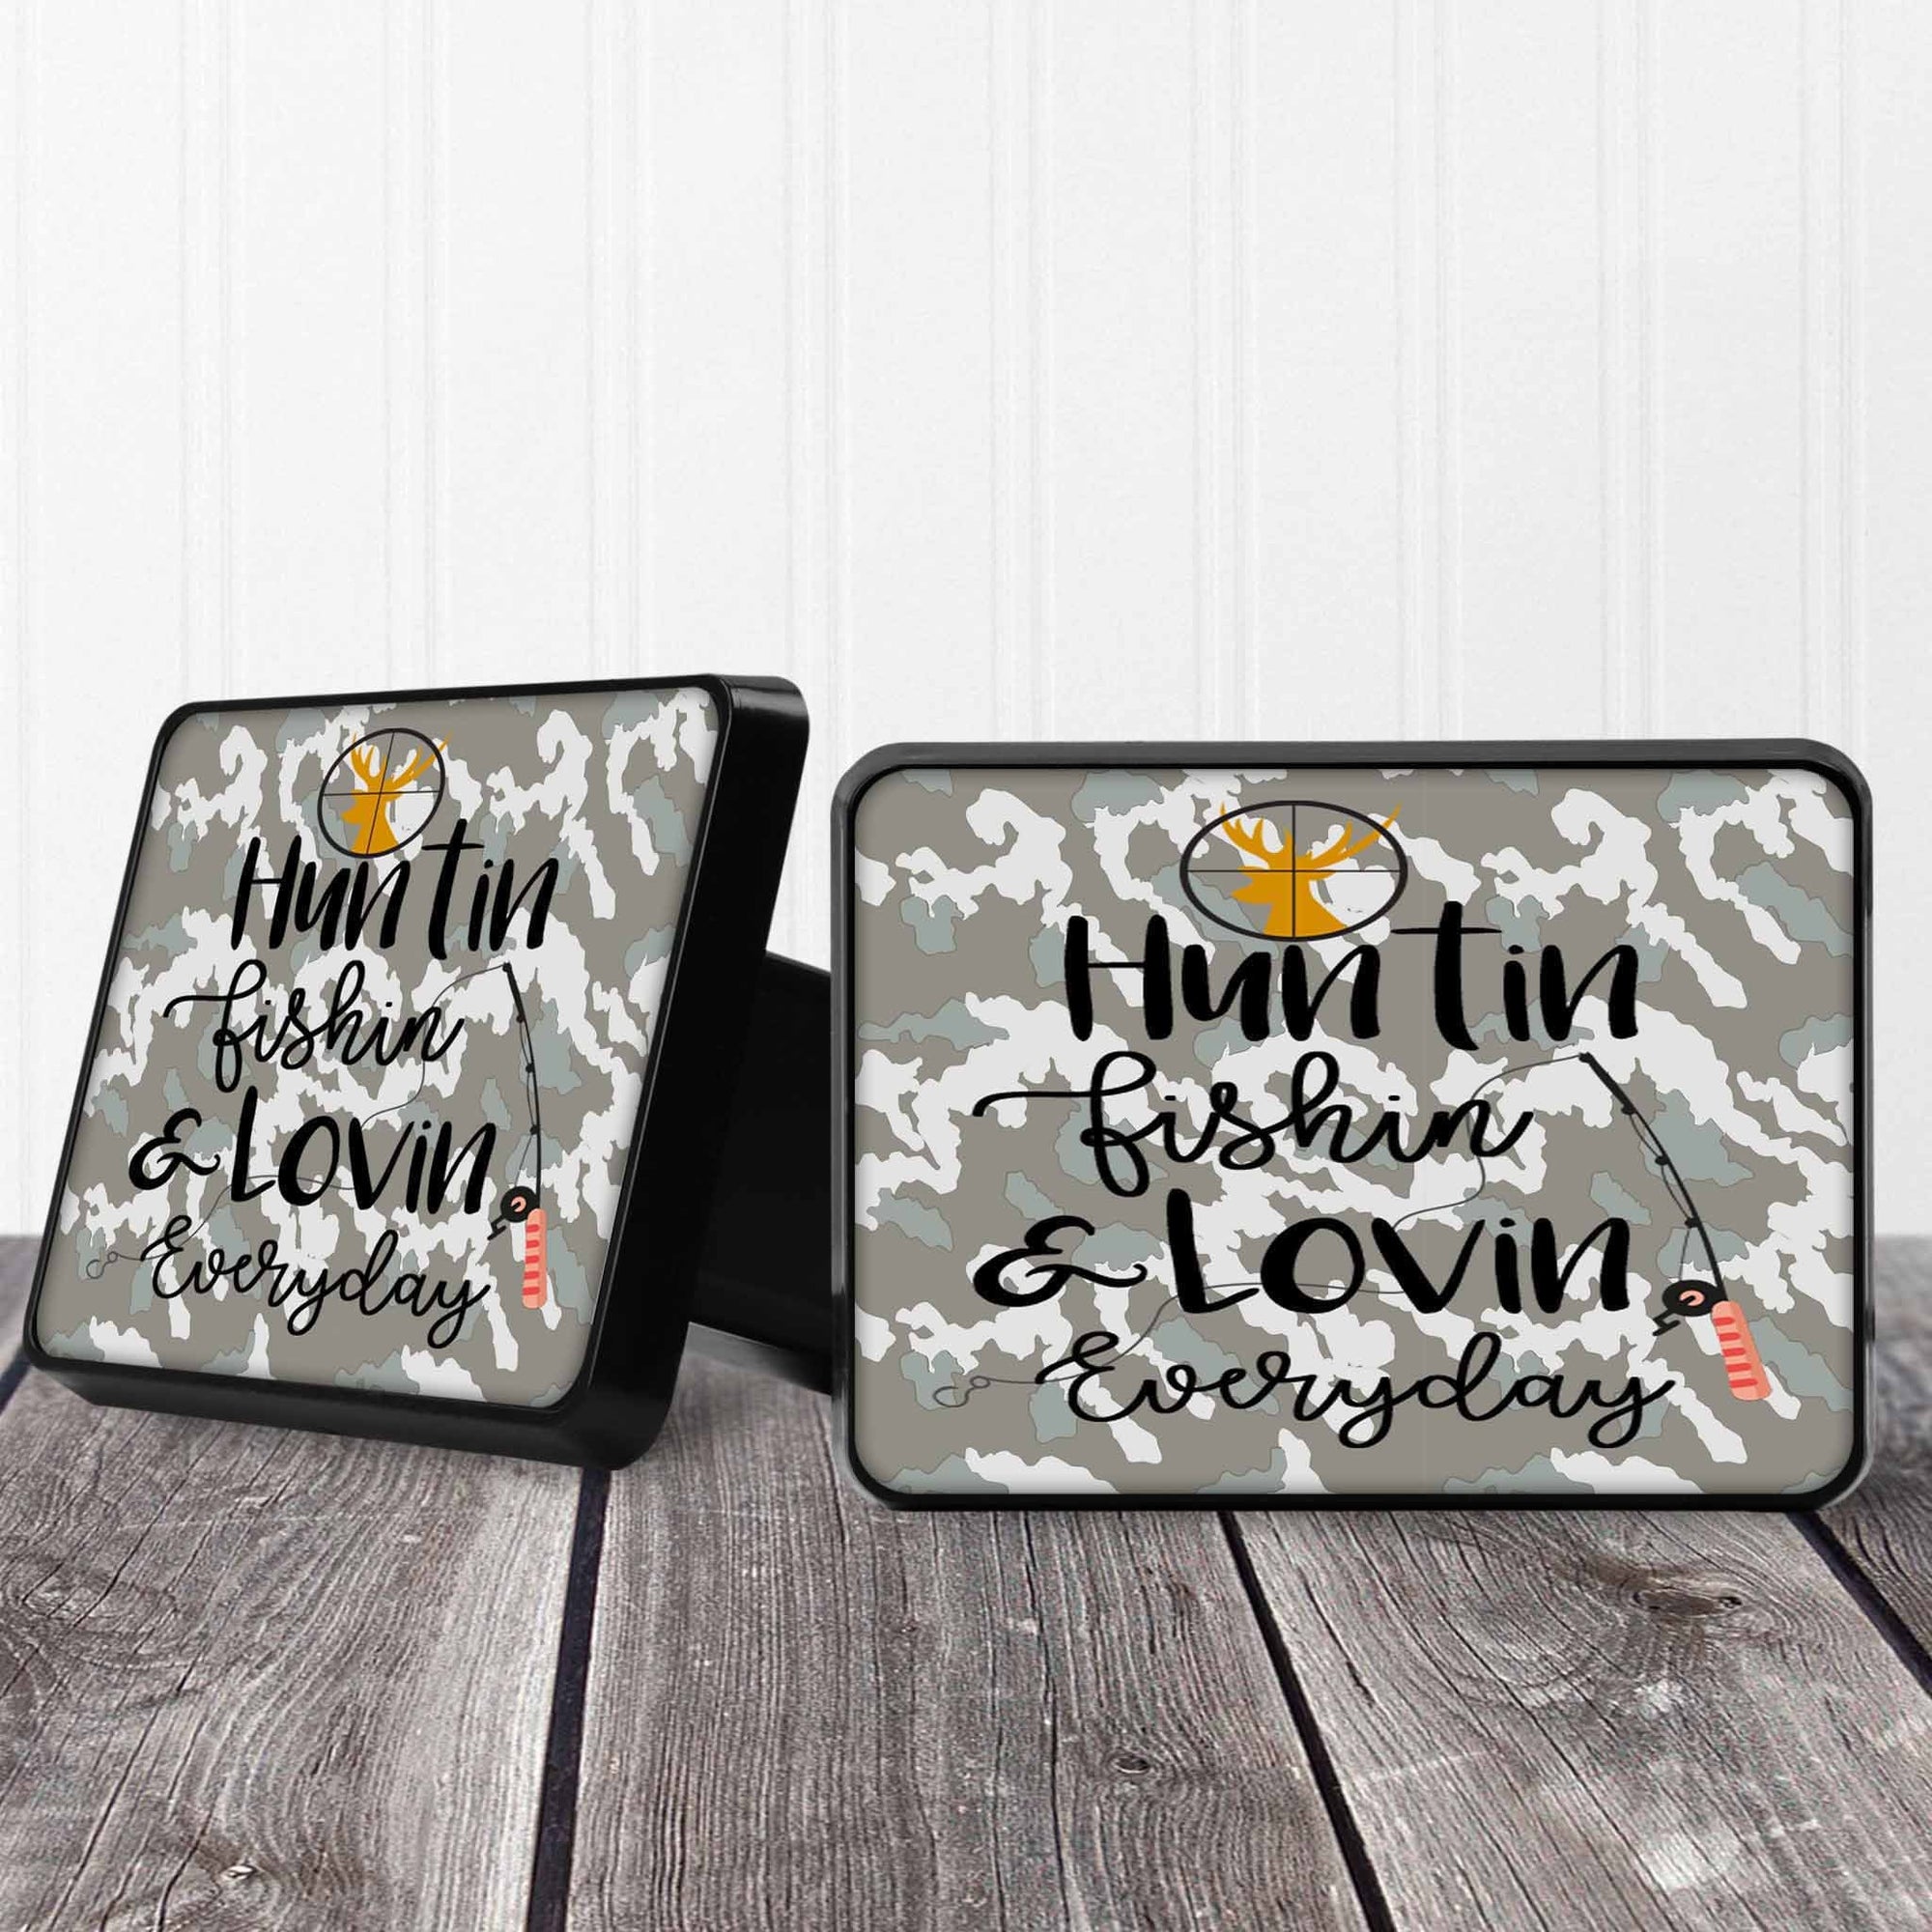 Personalized Trailer Hitch Cover | Custom Car Accessories | Hunting Fishing and Loving Everyday